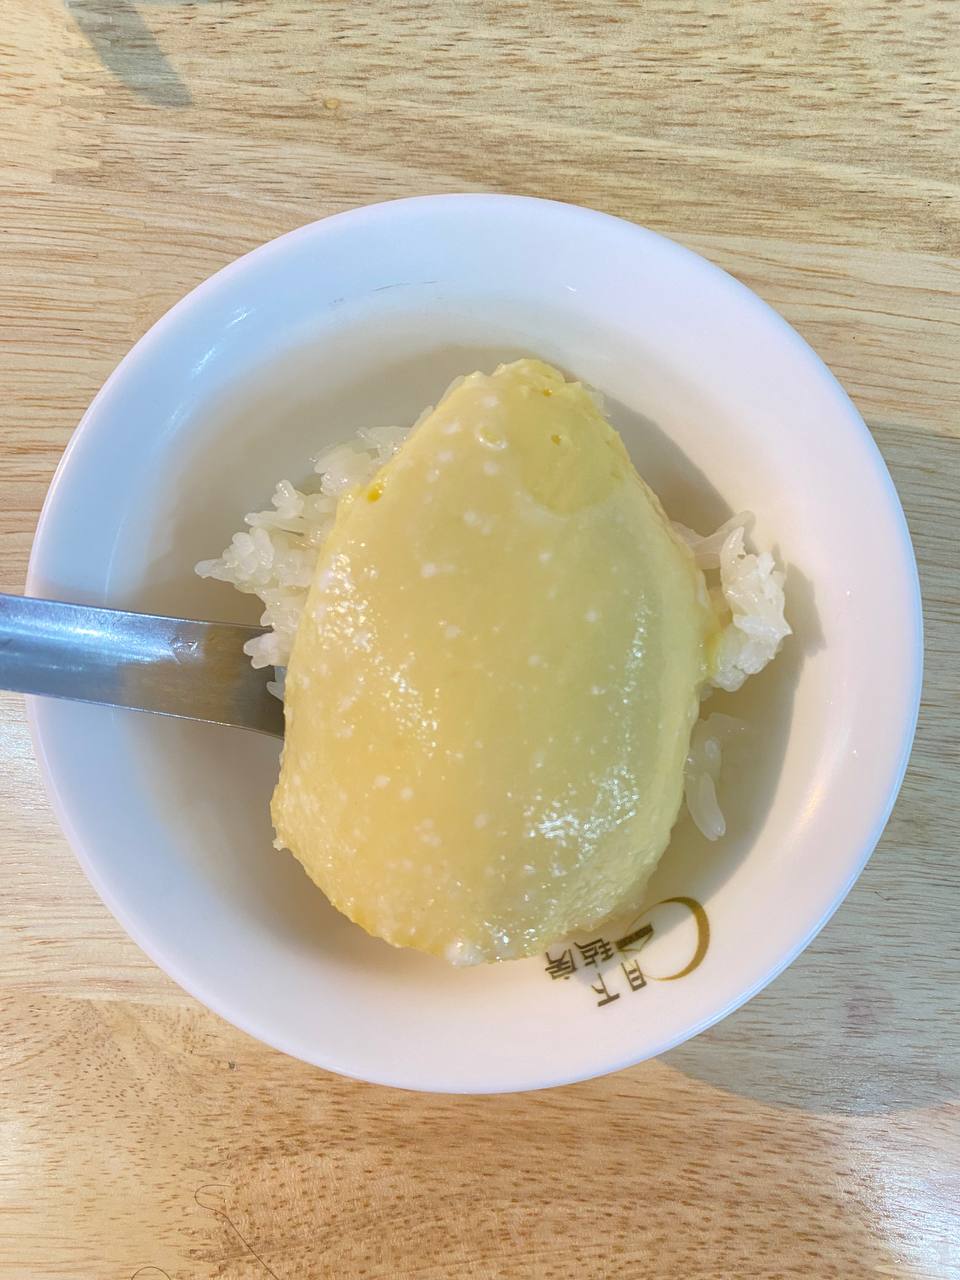 19. Sweet Sticky Rice with Durian